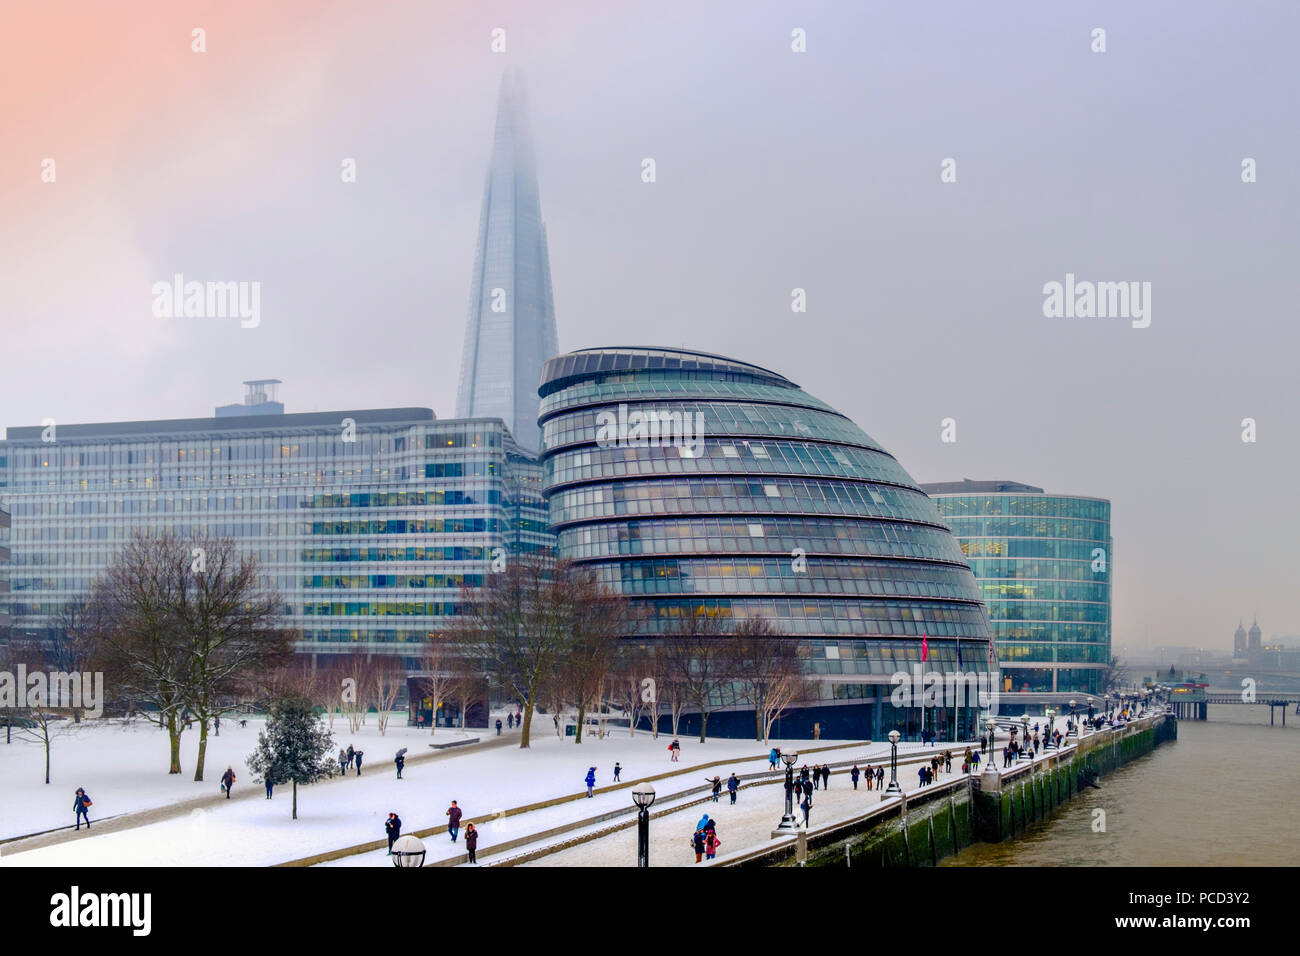 The South Bank of the River Thames showing the Shard and City Hall, HQ of the Mayor of London, in snow, London, England, United Kingdom, Europe Stock Photo